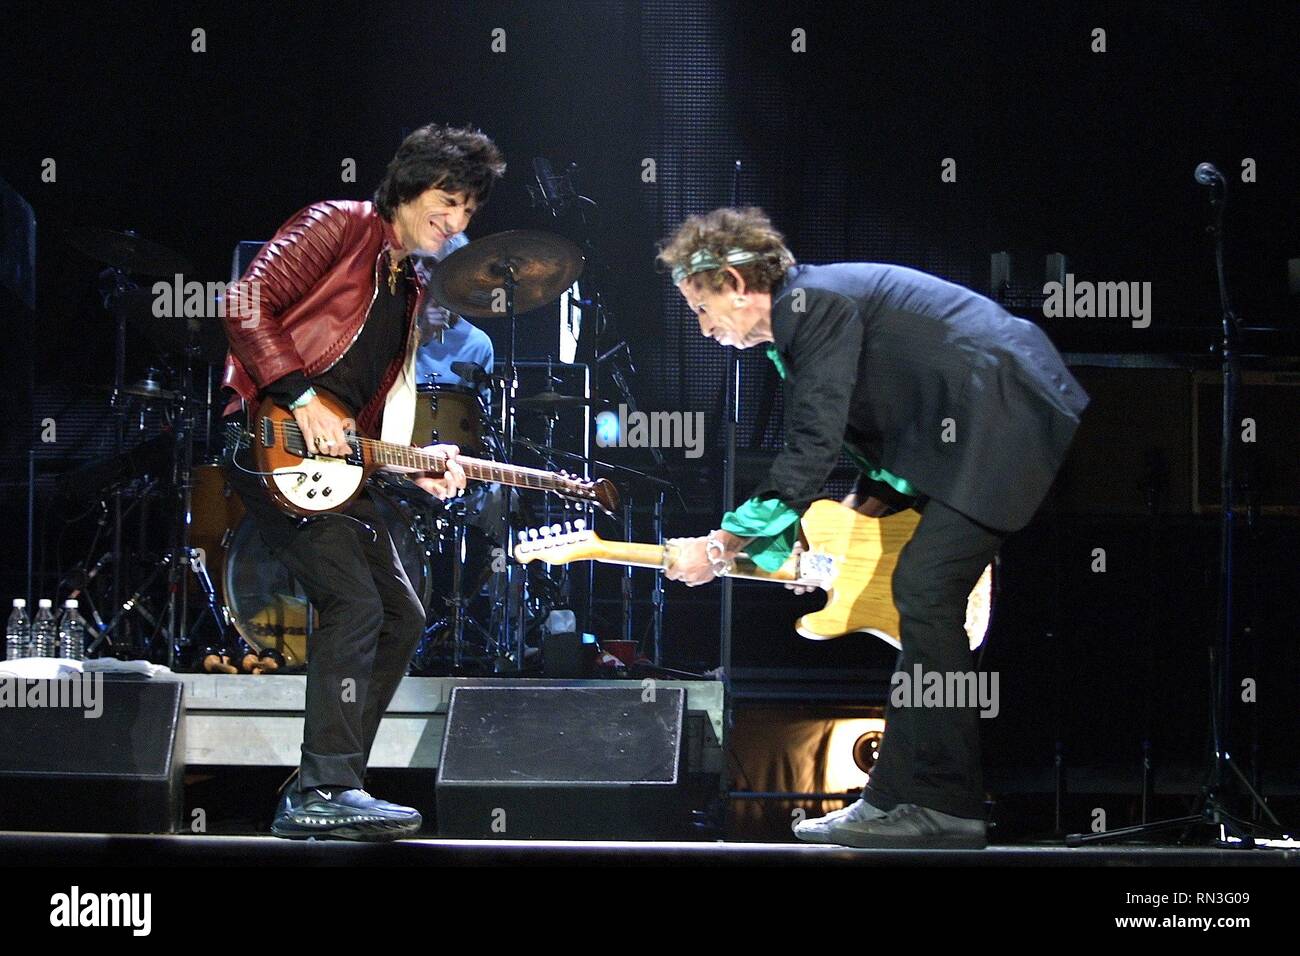 Guitarists Ron Wood and Keith Richards of the Rolling Stones are shown performing on stage during a 'live' concert appearance. Stock Photo